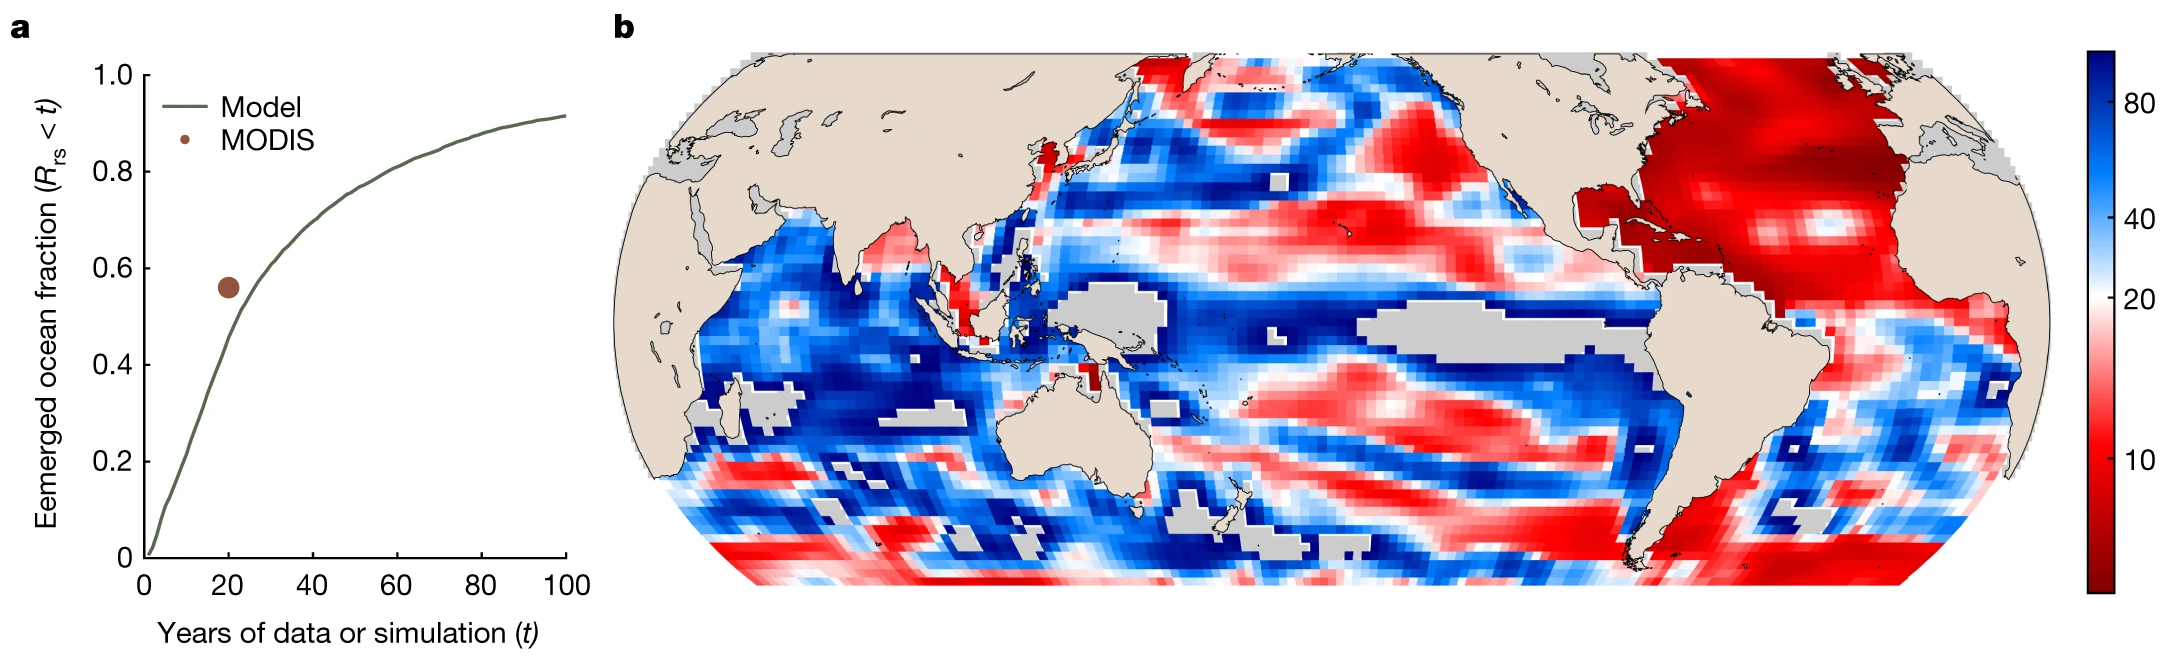 The modelled Rrs ToE of 20 years or less is similar to the location and extent of the observed 20-year data where SNR is higher than 2. a, Cumulative distribution function of the ToE of the ocean-colour trend in the model simulation. The orange point indicates the fraction of the total surface-ocean area with a significant trend in the 20-year MODIS-Aqua time series. Compare this with Fig. 10 in ref. 2, which shows less than 10% of the ocean with an emerged Chl trend after 20 years. b, Map of the ToE in the model simulation (median = 22 years). Grid cells are coloured by percentile, with white at 20 years, such that all white and red grid cells have a ToE of 20 years or less, and all blue grid cells have a ToE of more than 20 years. Grey grid cells do not have significant Rrs trends over the twenty-first century. See ref. 2 for a similar plot for Chl. Graphic: Cael, et al., 2023 / Nature